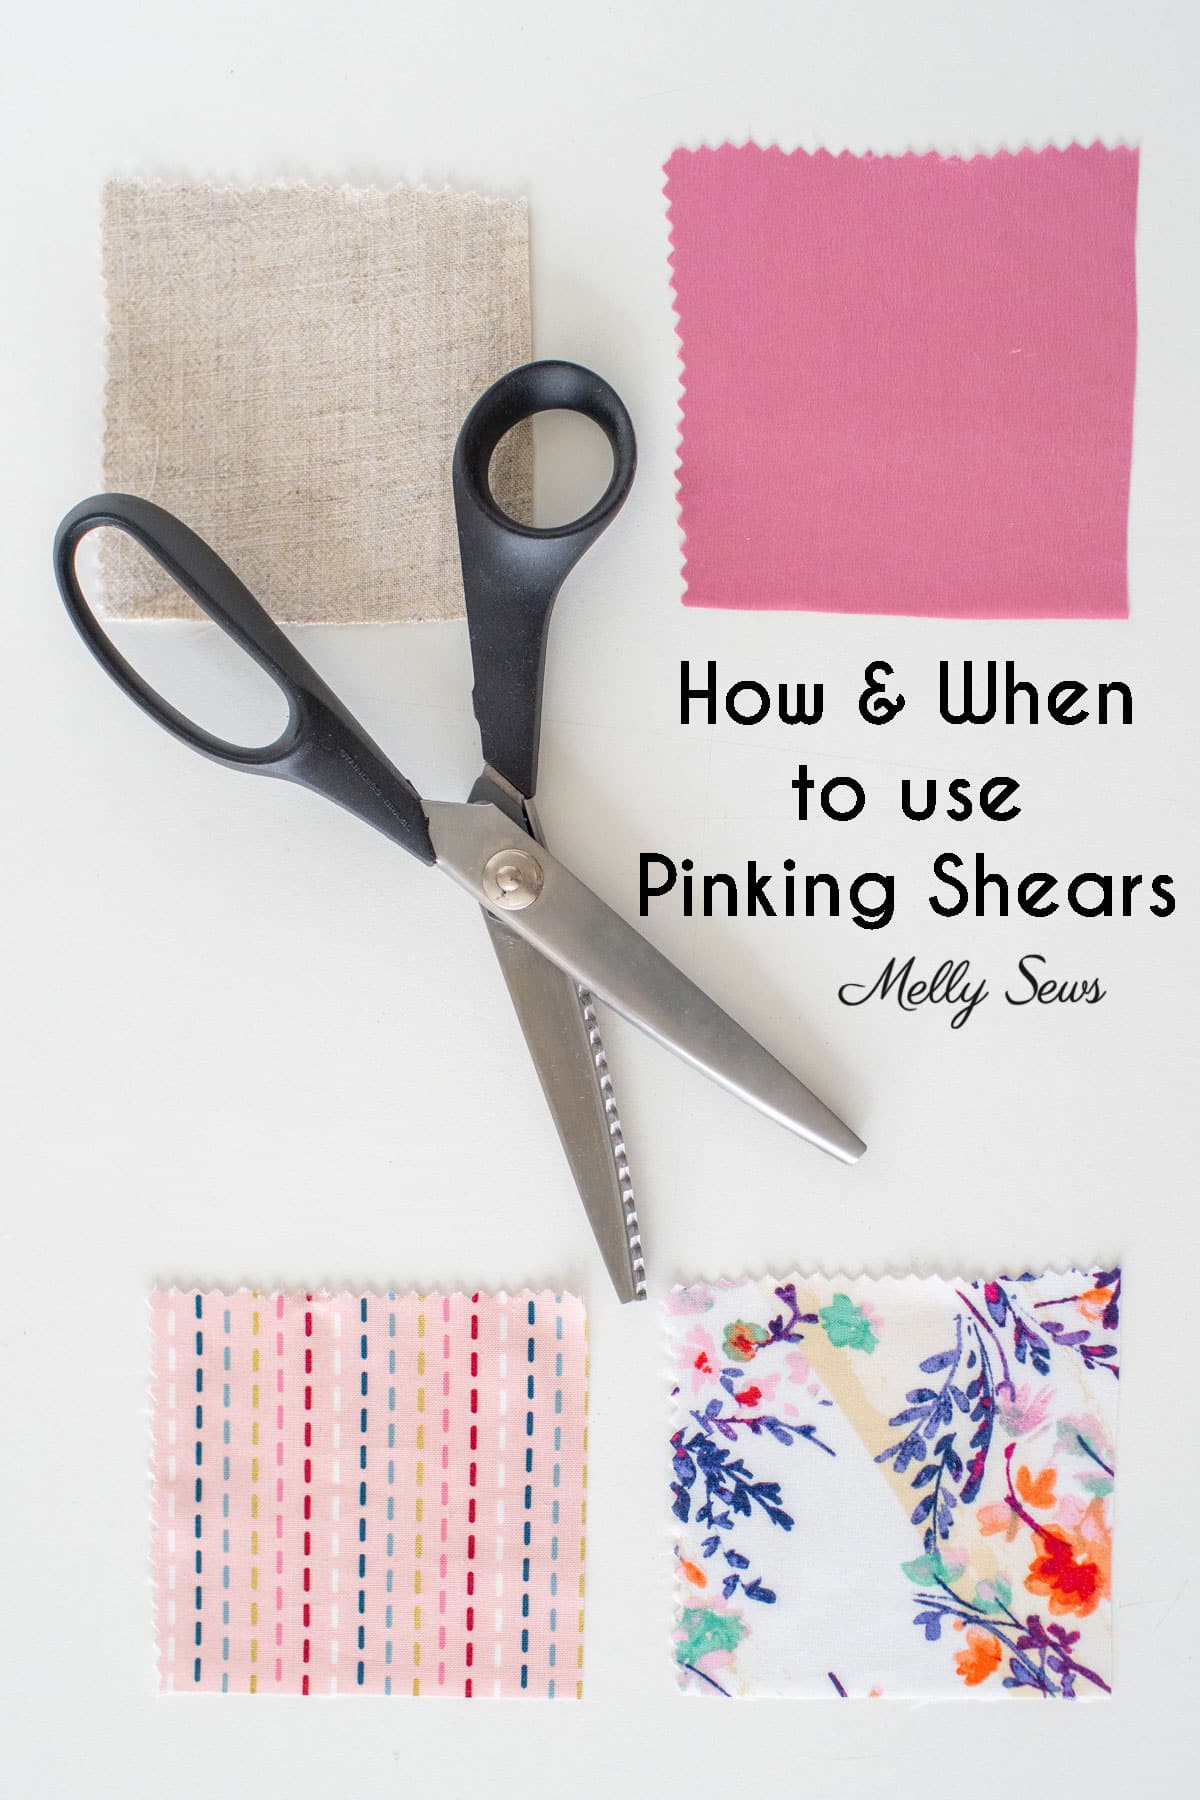 What Are Pinking Shears And How To Use Them? 